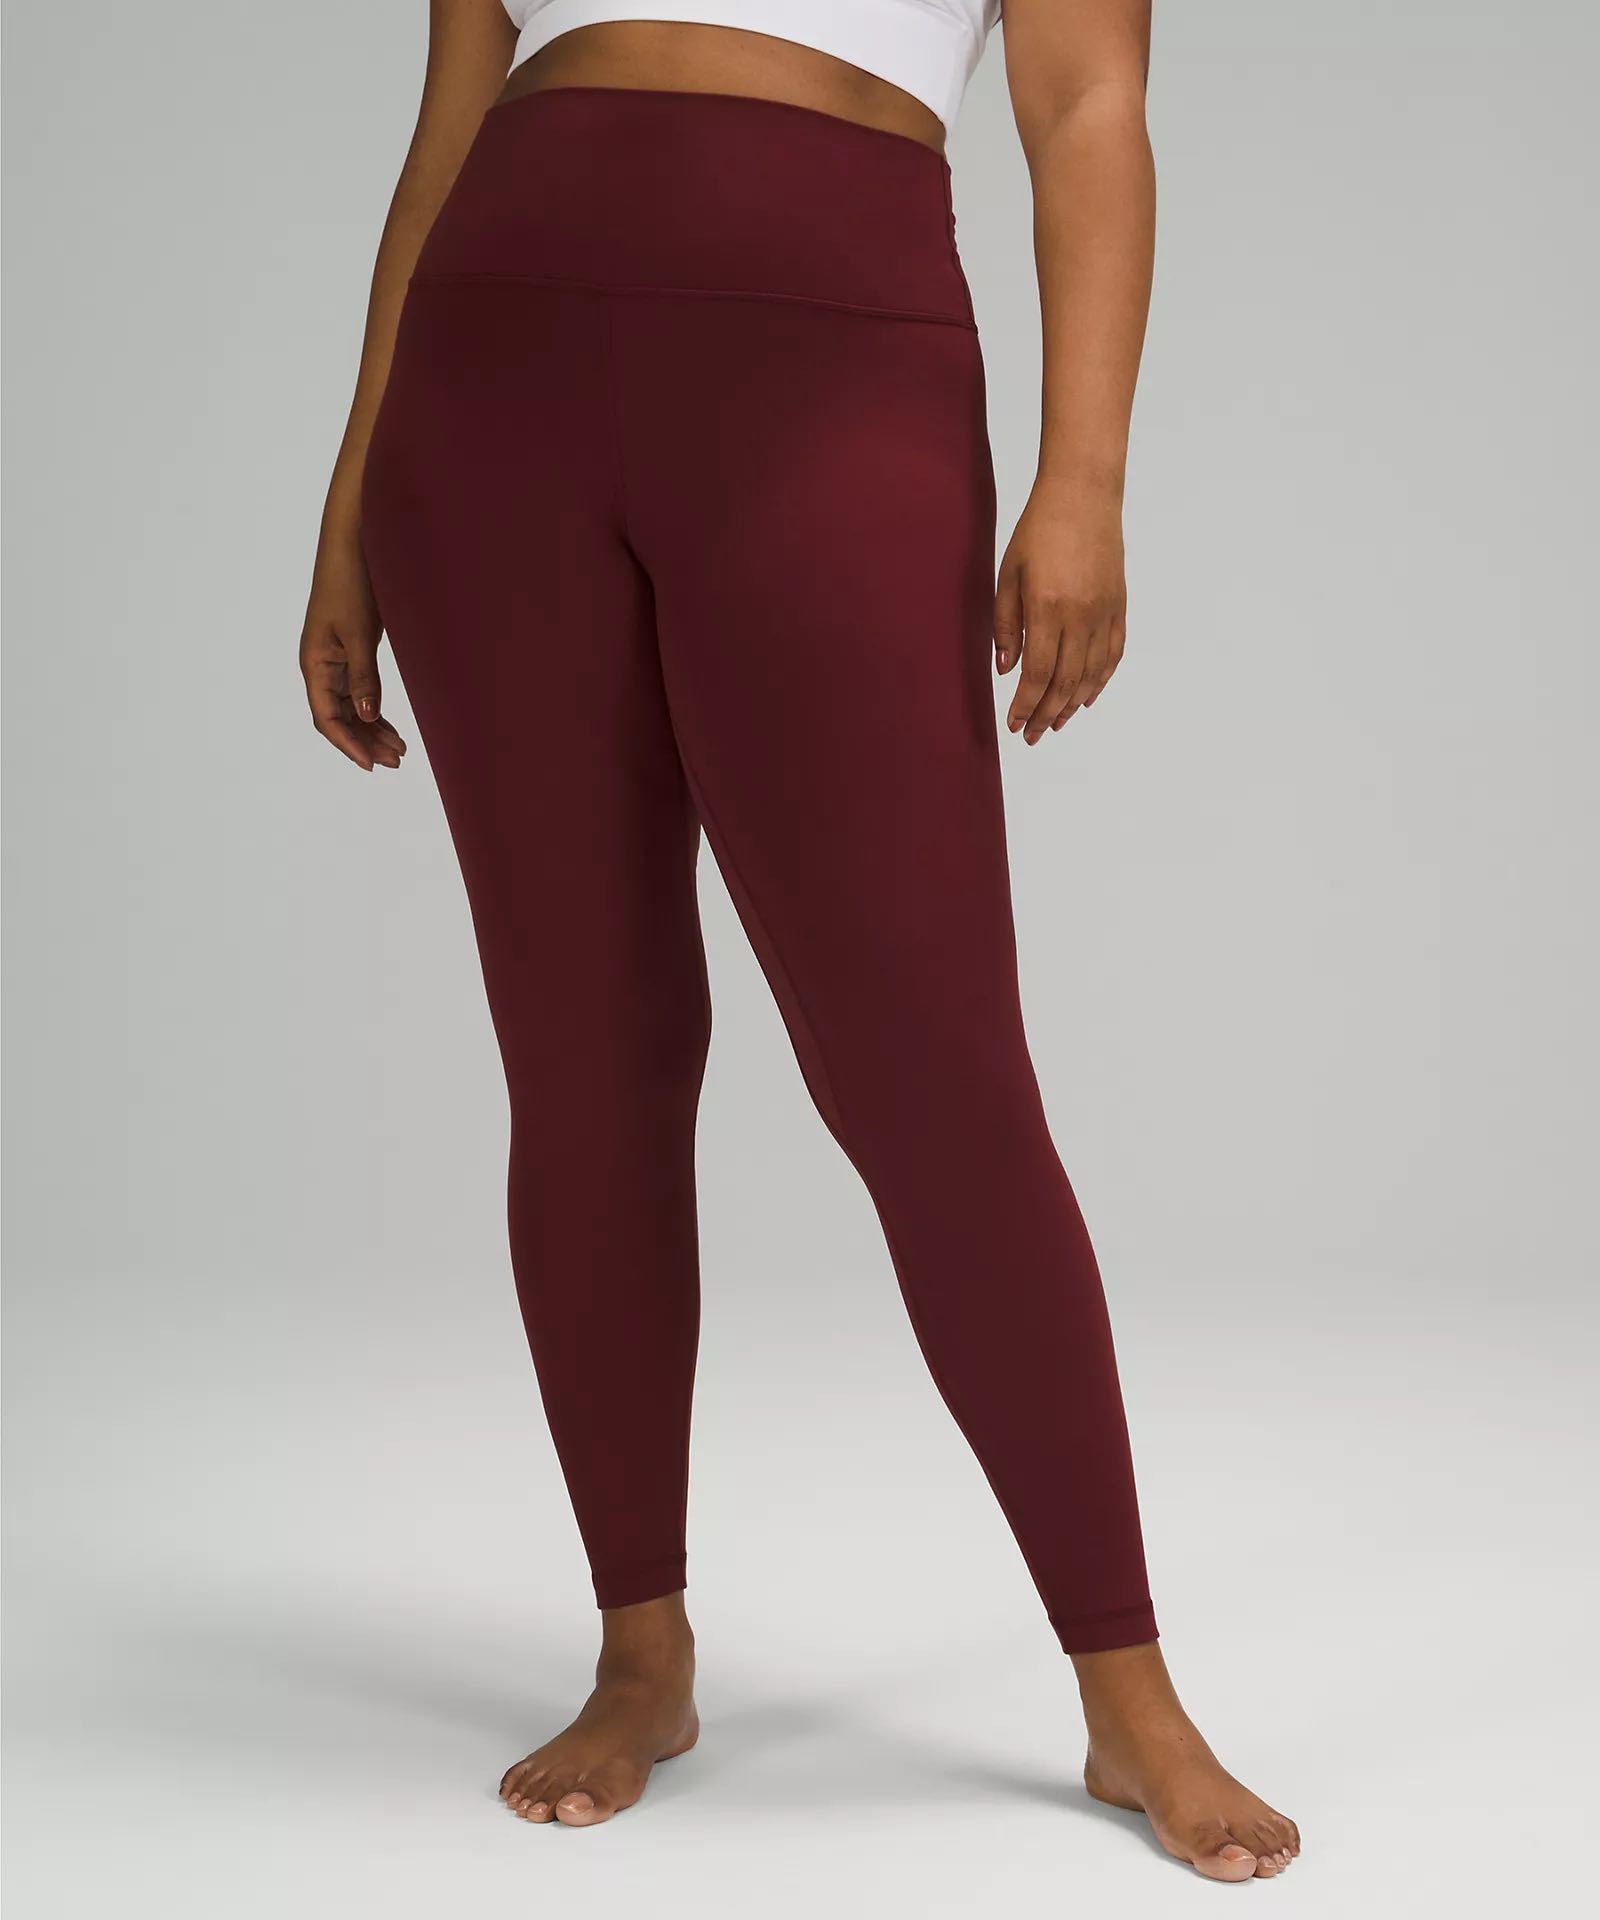 Hot stuff: stand out in the best stylish yoga wear